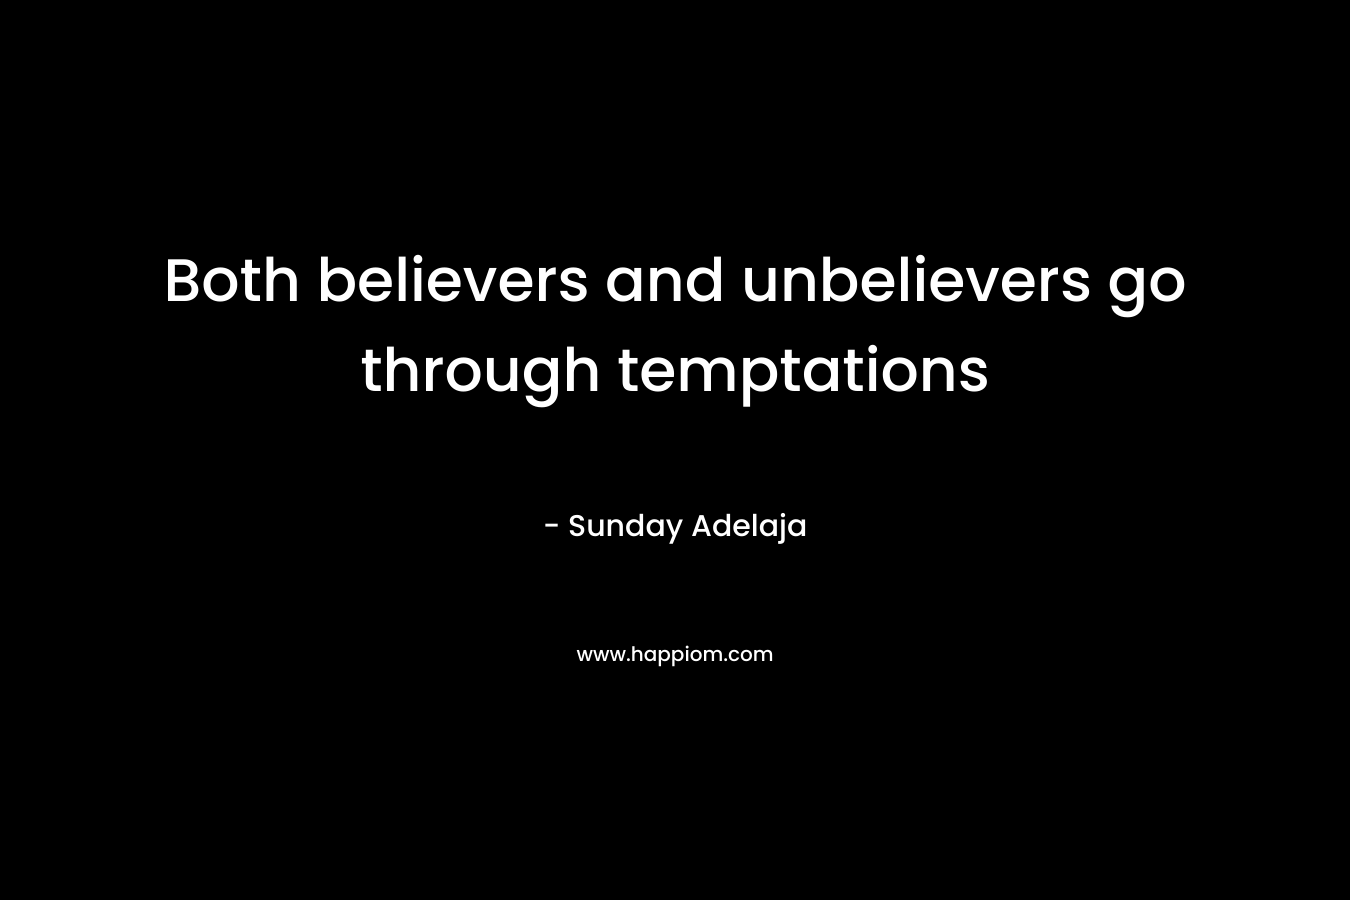 Both believers and unbelievers go through temptations